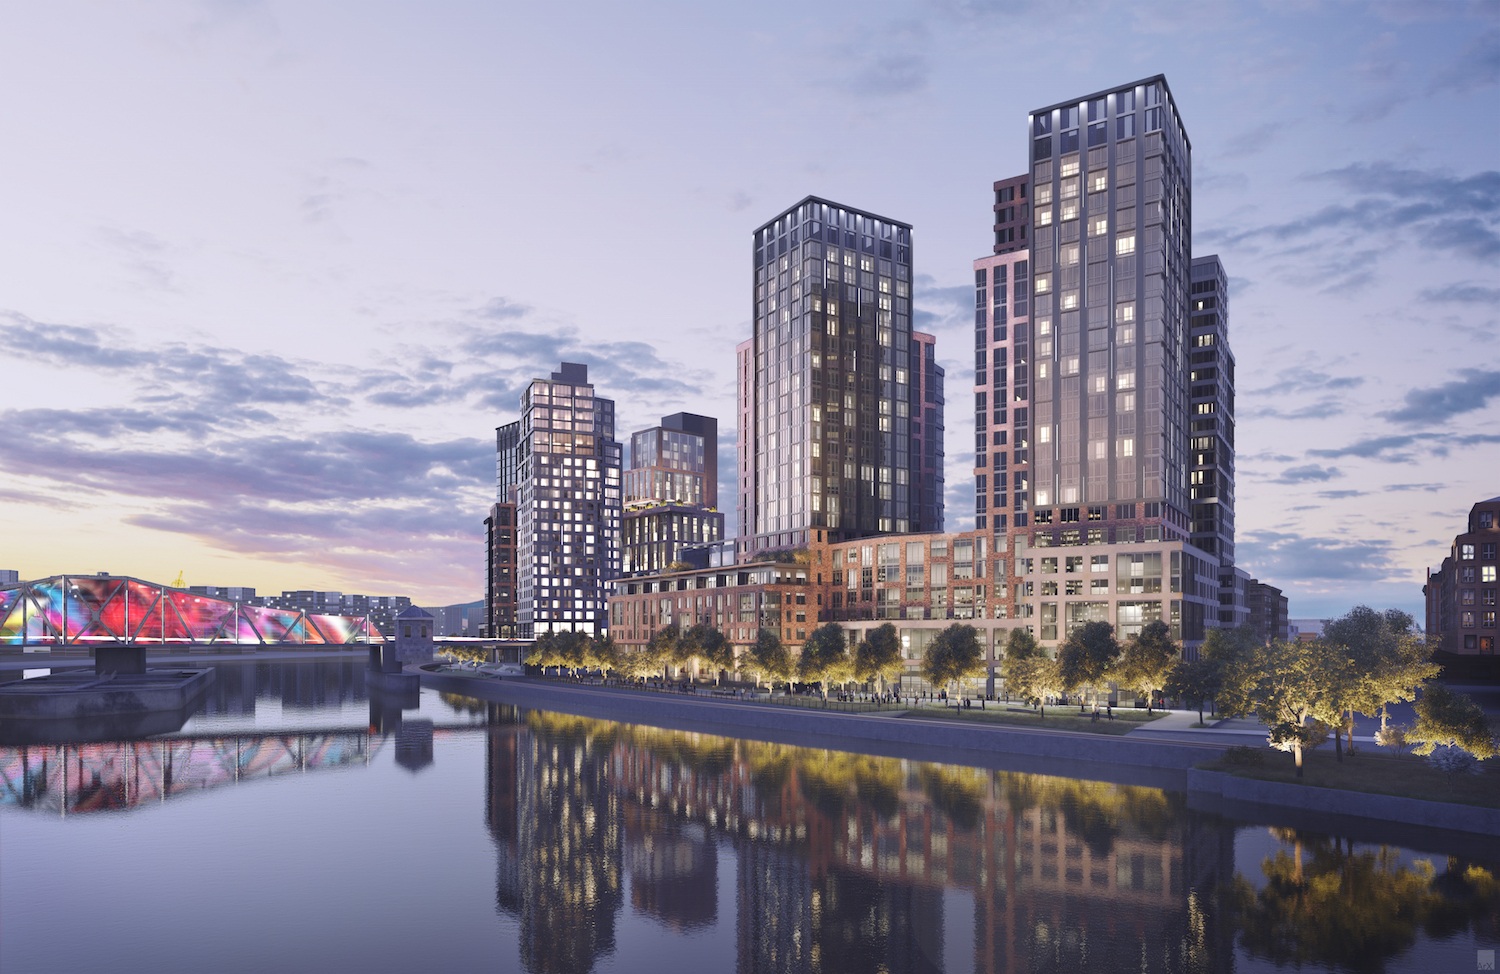 More renderings, details released for massive South Bronx waterfront development